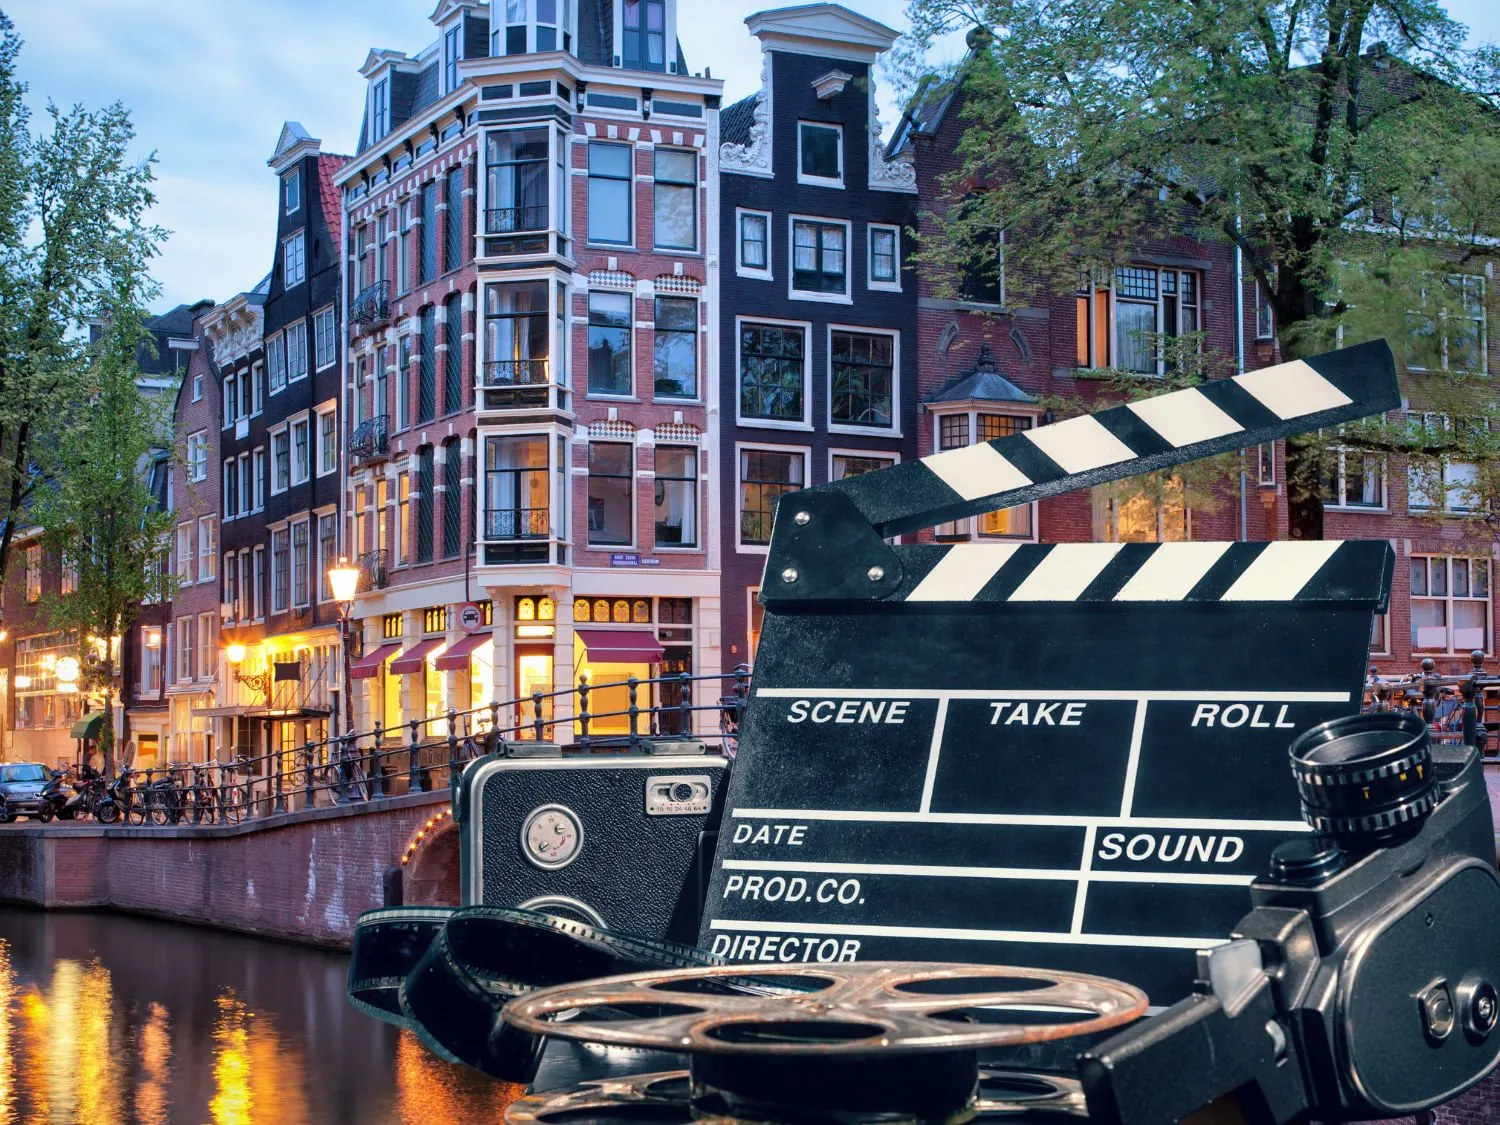 12 Extraordinary Movies Set In Amsterdam That Will Inspire You To Visit!